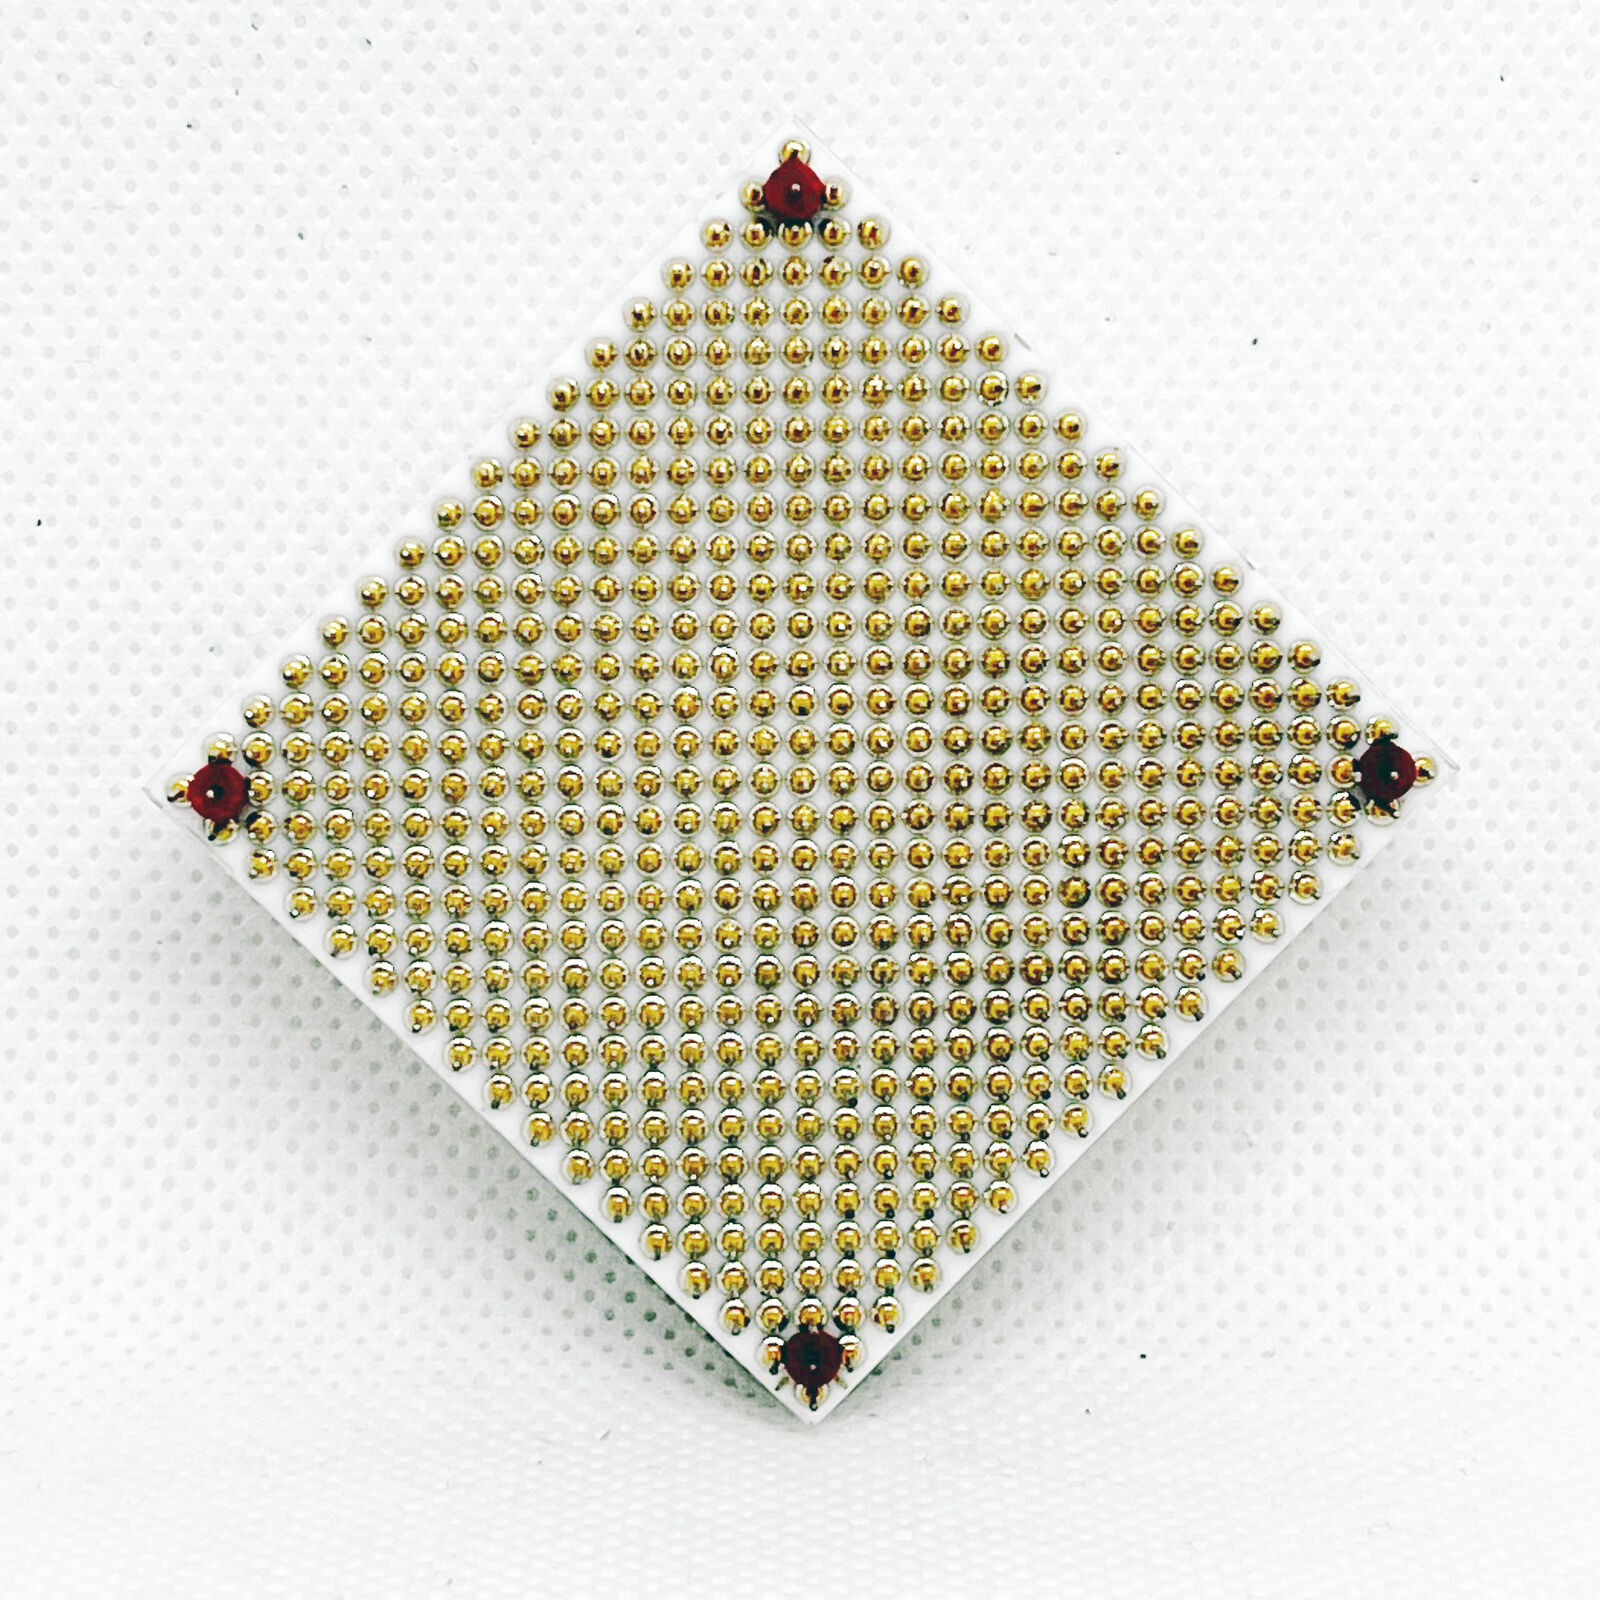 1X IBM white ceramic CPU was produced in 1970 with extremely high K gold content